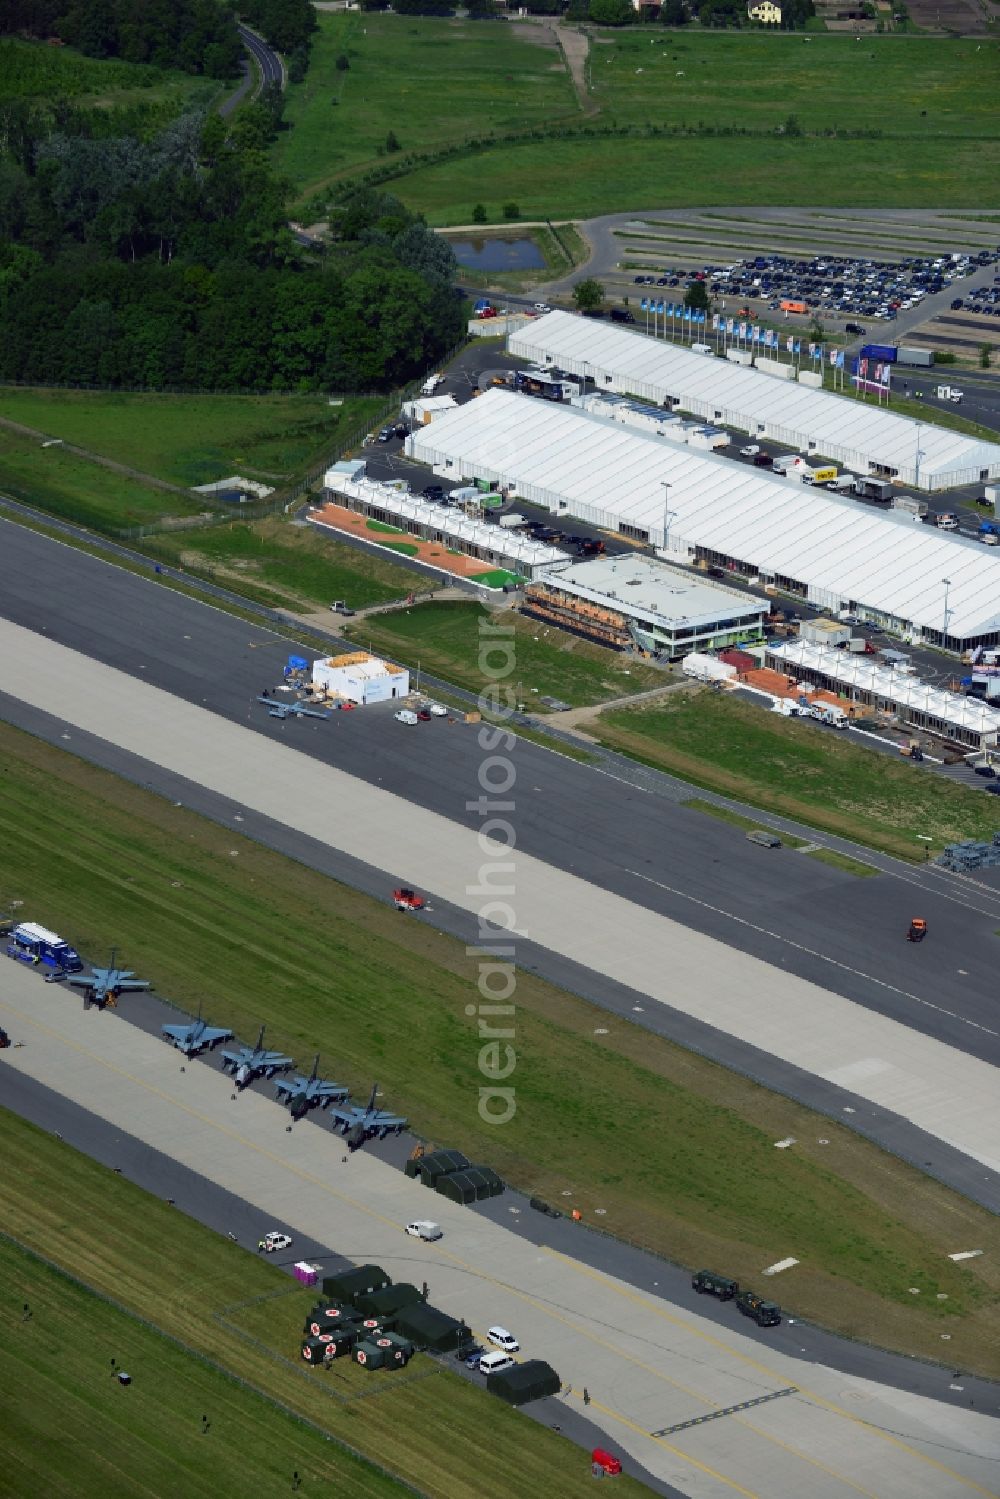 Aerial image Schönefeld Selchow - View of the exhibition grounds of the International Air Show ILA 2014 on the grounds of the airport Berlin-Schoenefeld-Selchow before the opening